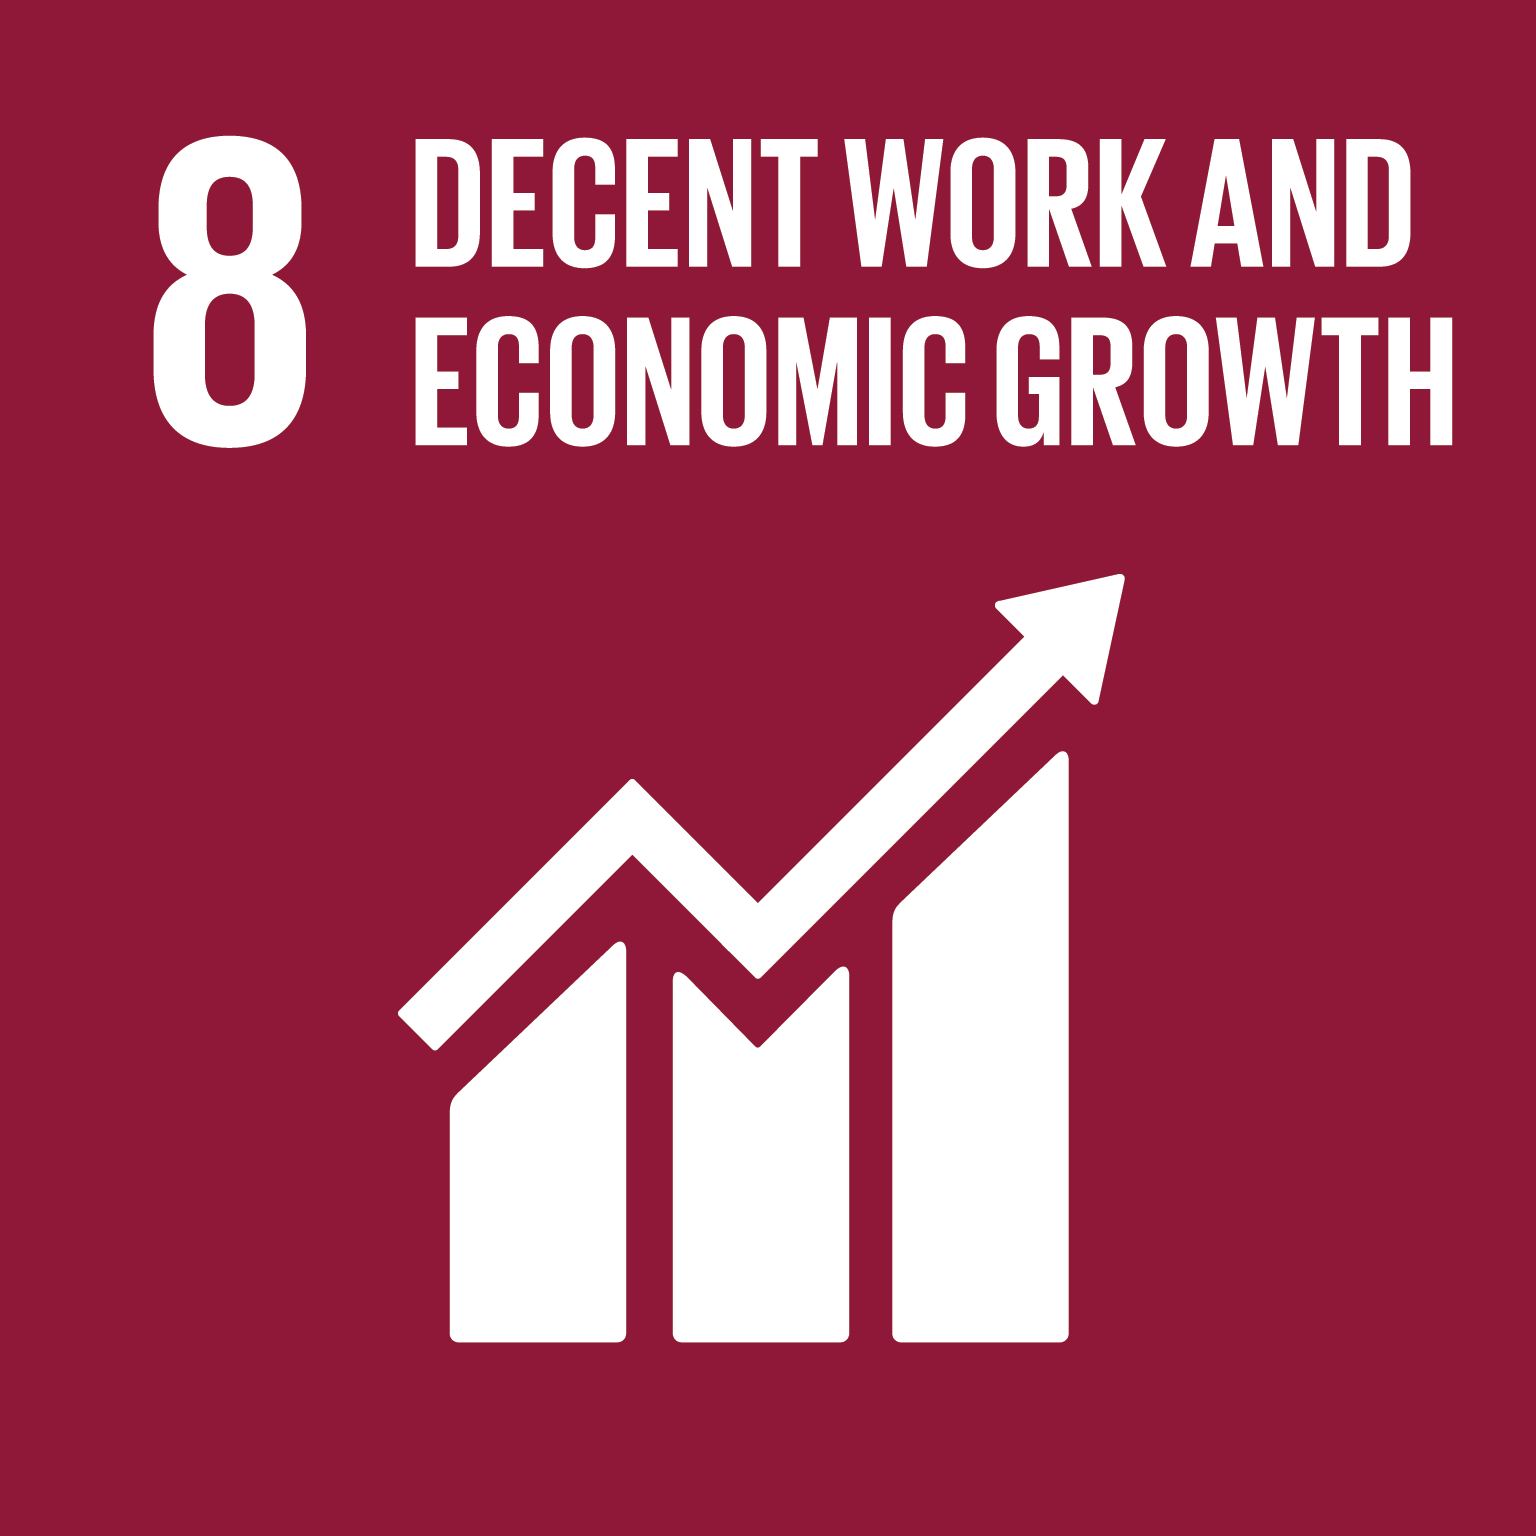 Goal 8 - decent work and economic growth